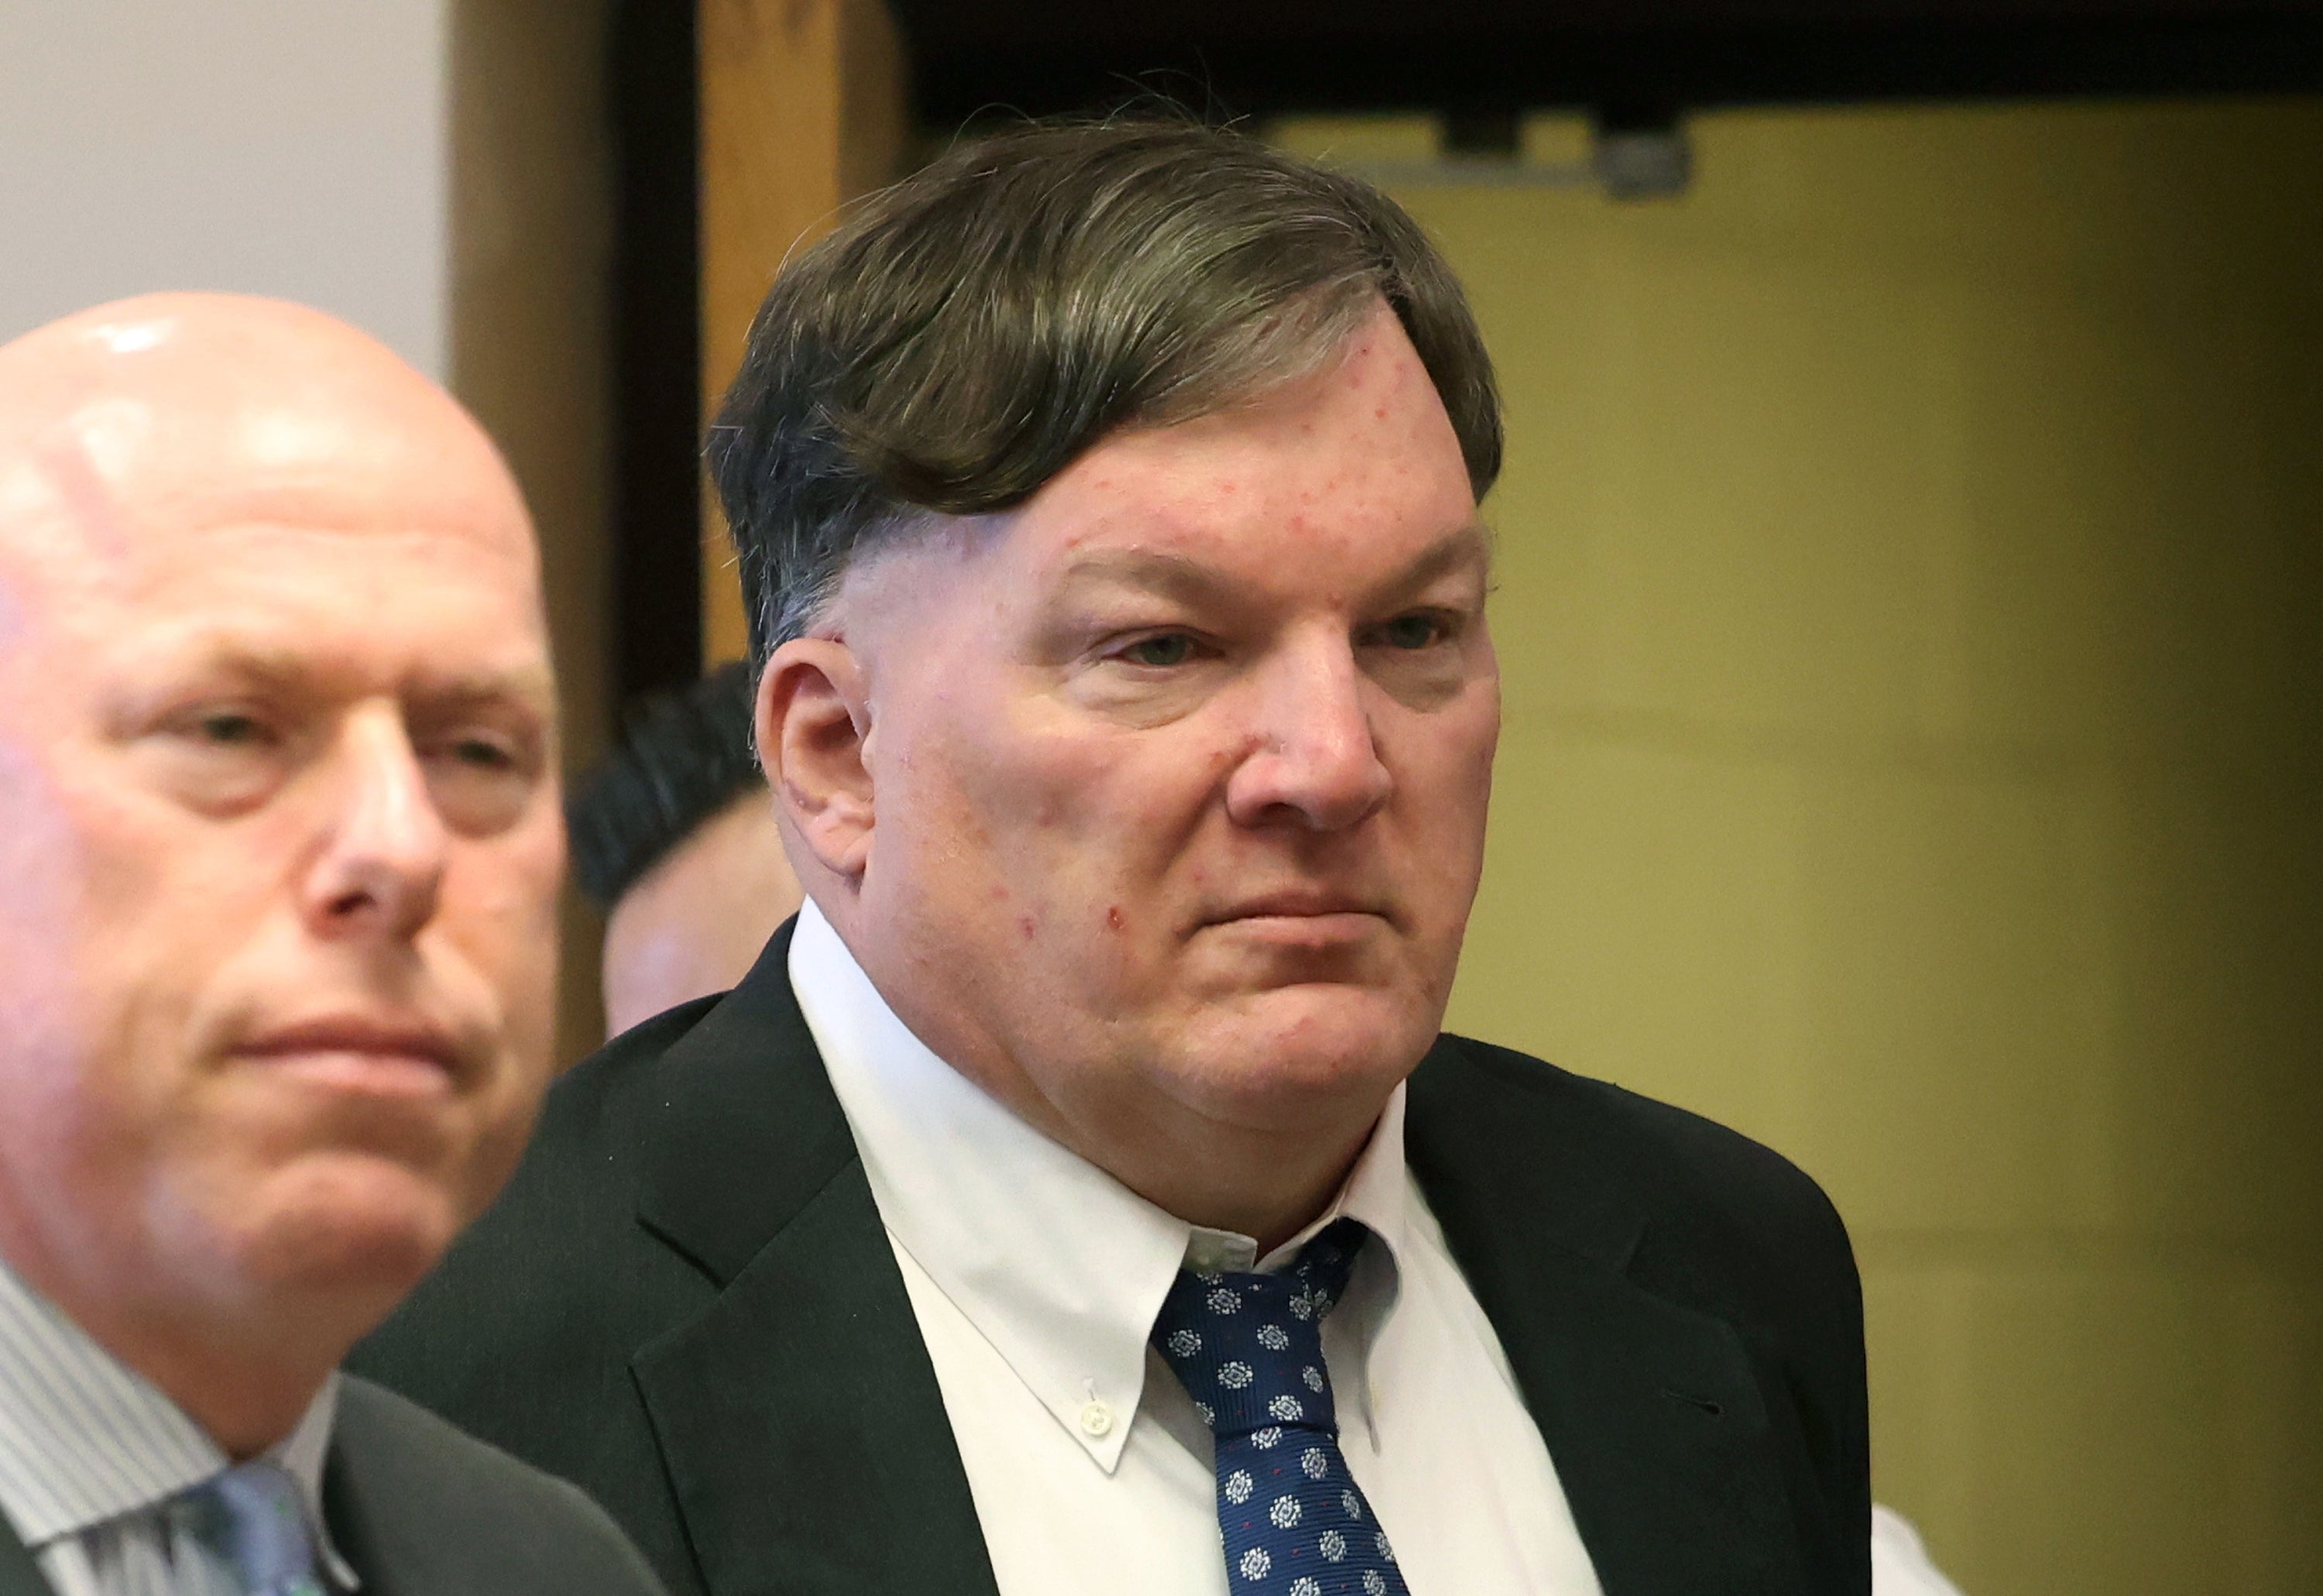 Alleged Gilgo serial killer Rex Heuermann, right, along with his attorney Michael Brown, appears inside Judge Tim Mazzei's courtroom in February 2024 after being charged with the murders of four women